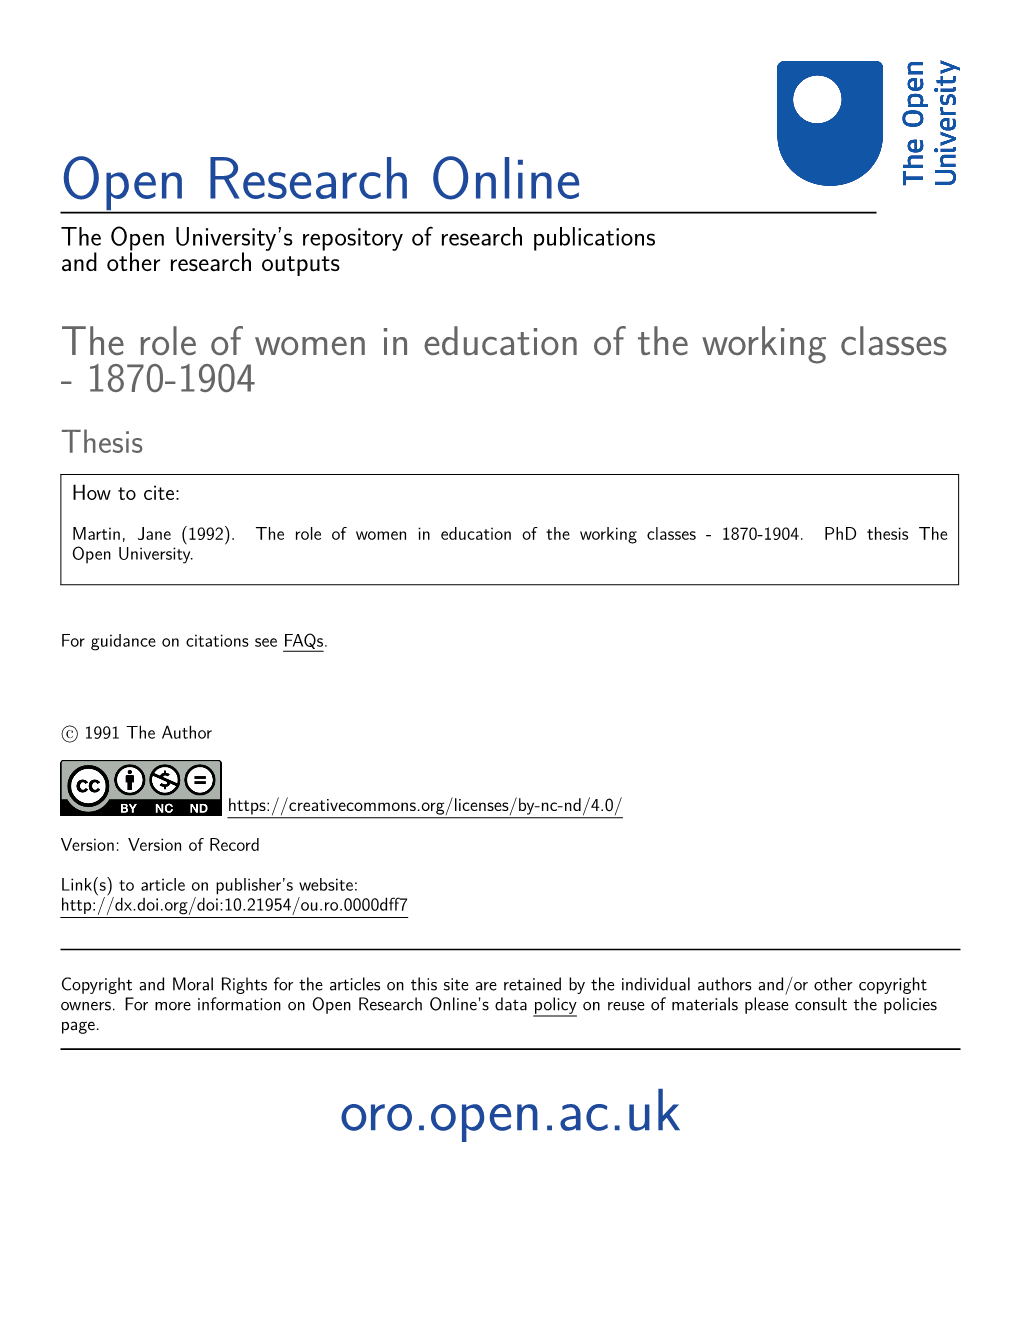 The Role of Women in Education of the Working Classes - 1870-1904 Thesis